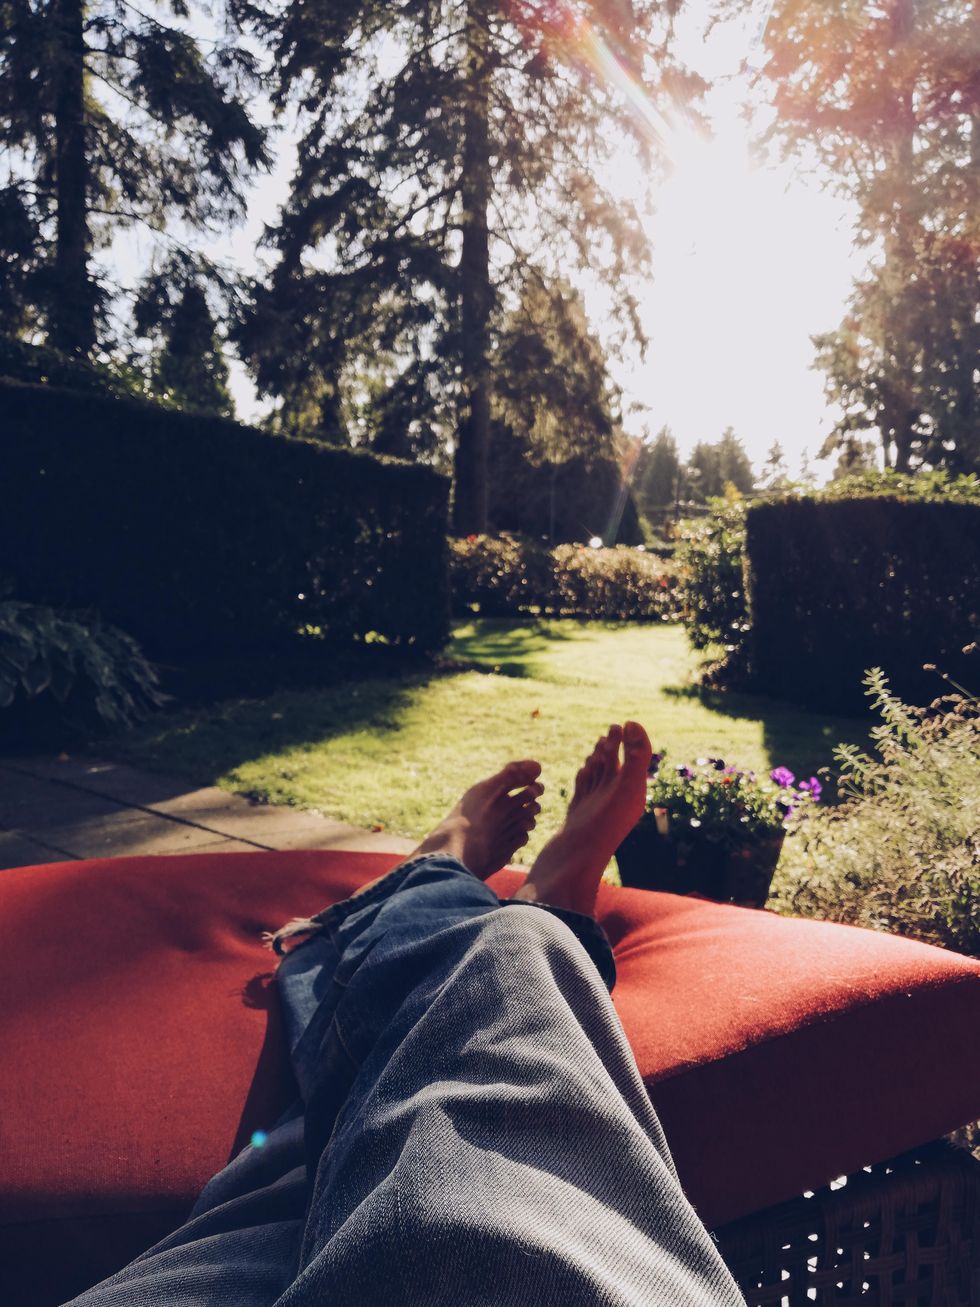 Person laying in their backyard wearing jeans